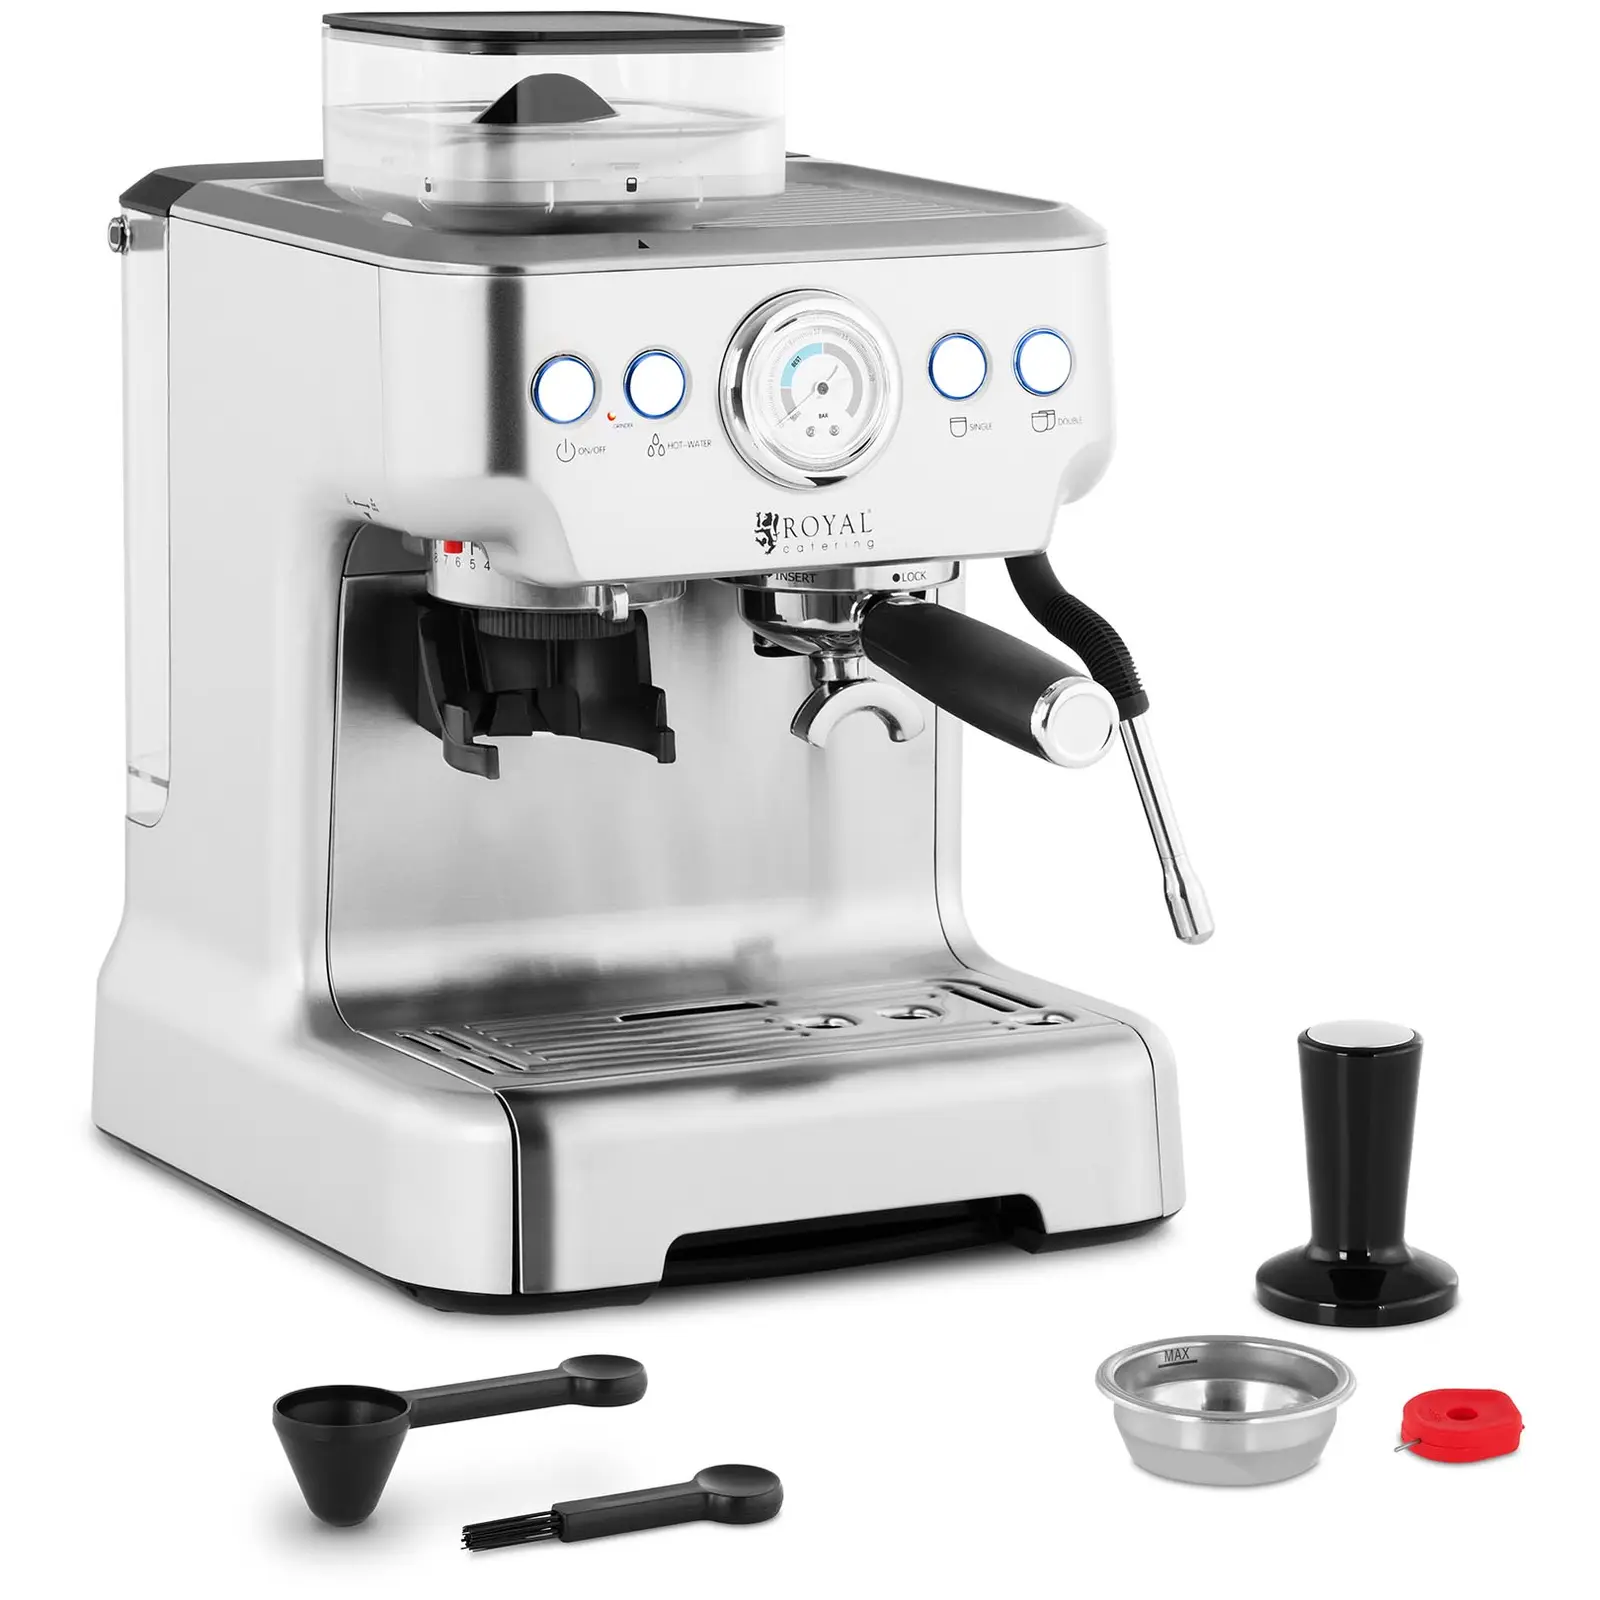 Stainless steel Portafilter Espresso Machine - 1 group - with built-in grinder and milk frother